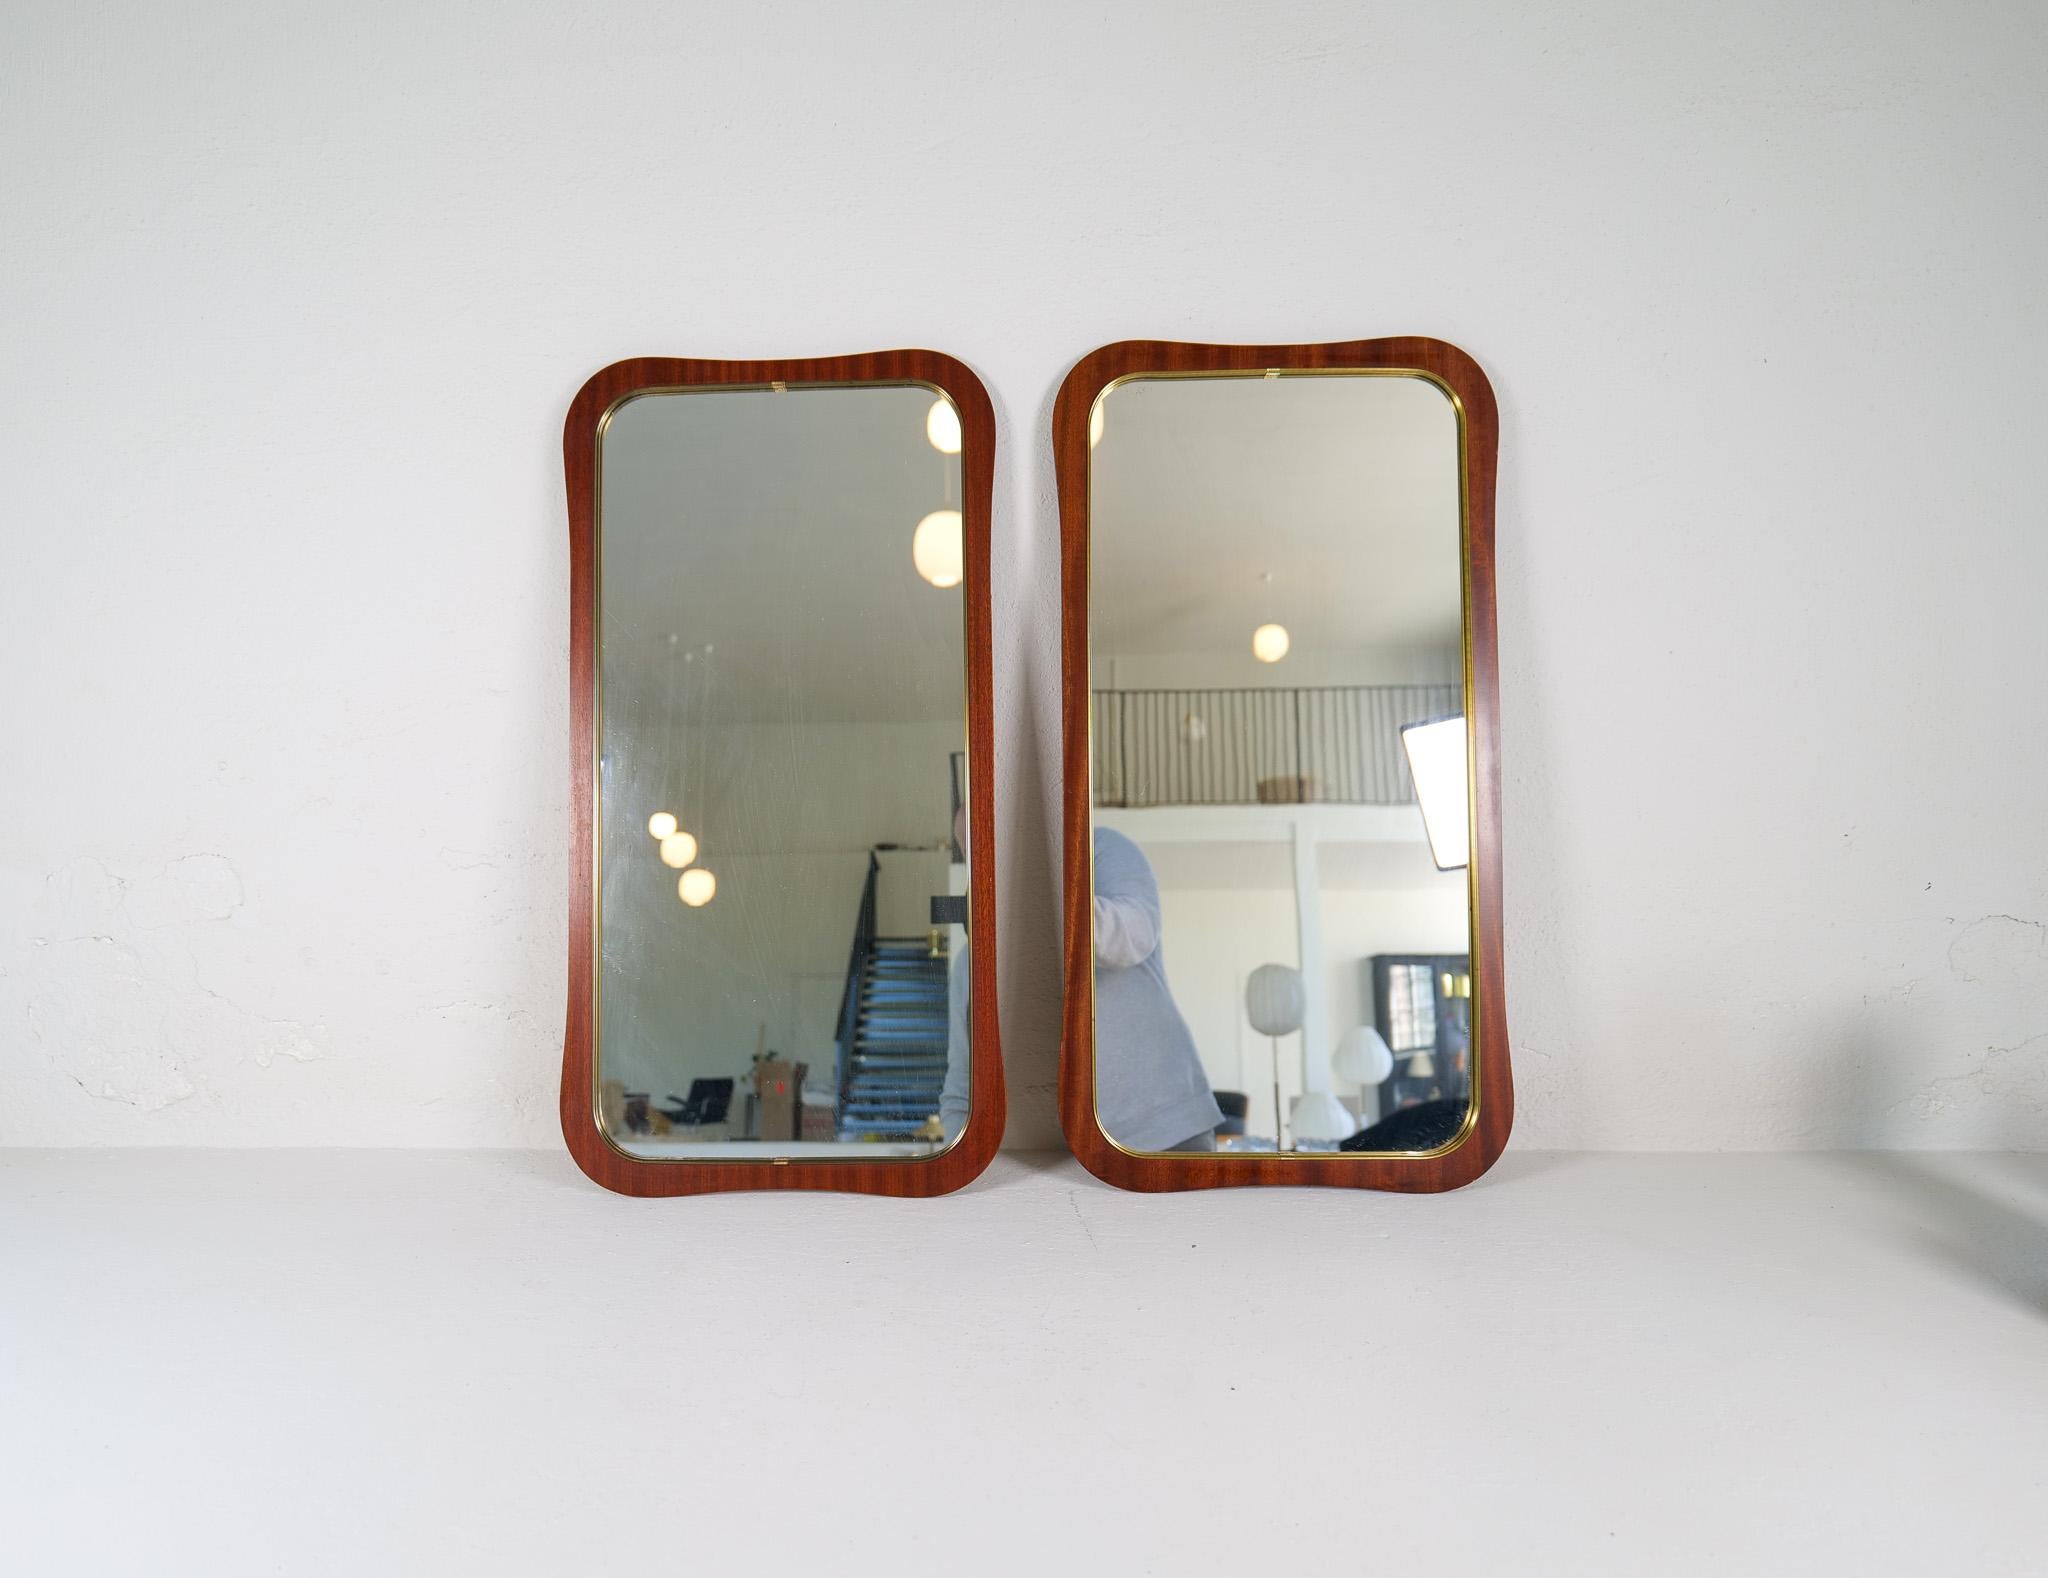 This pair of sculptured pair of mirrors was made in Sweden during the late 1950s. Gifted with that elegant Swedish Grace design, made in mahogany veneer with brass frame. 

Good vintage condition, small marks on the wood and the glass with vintage